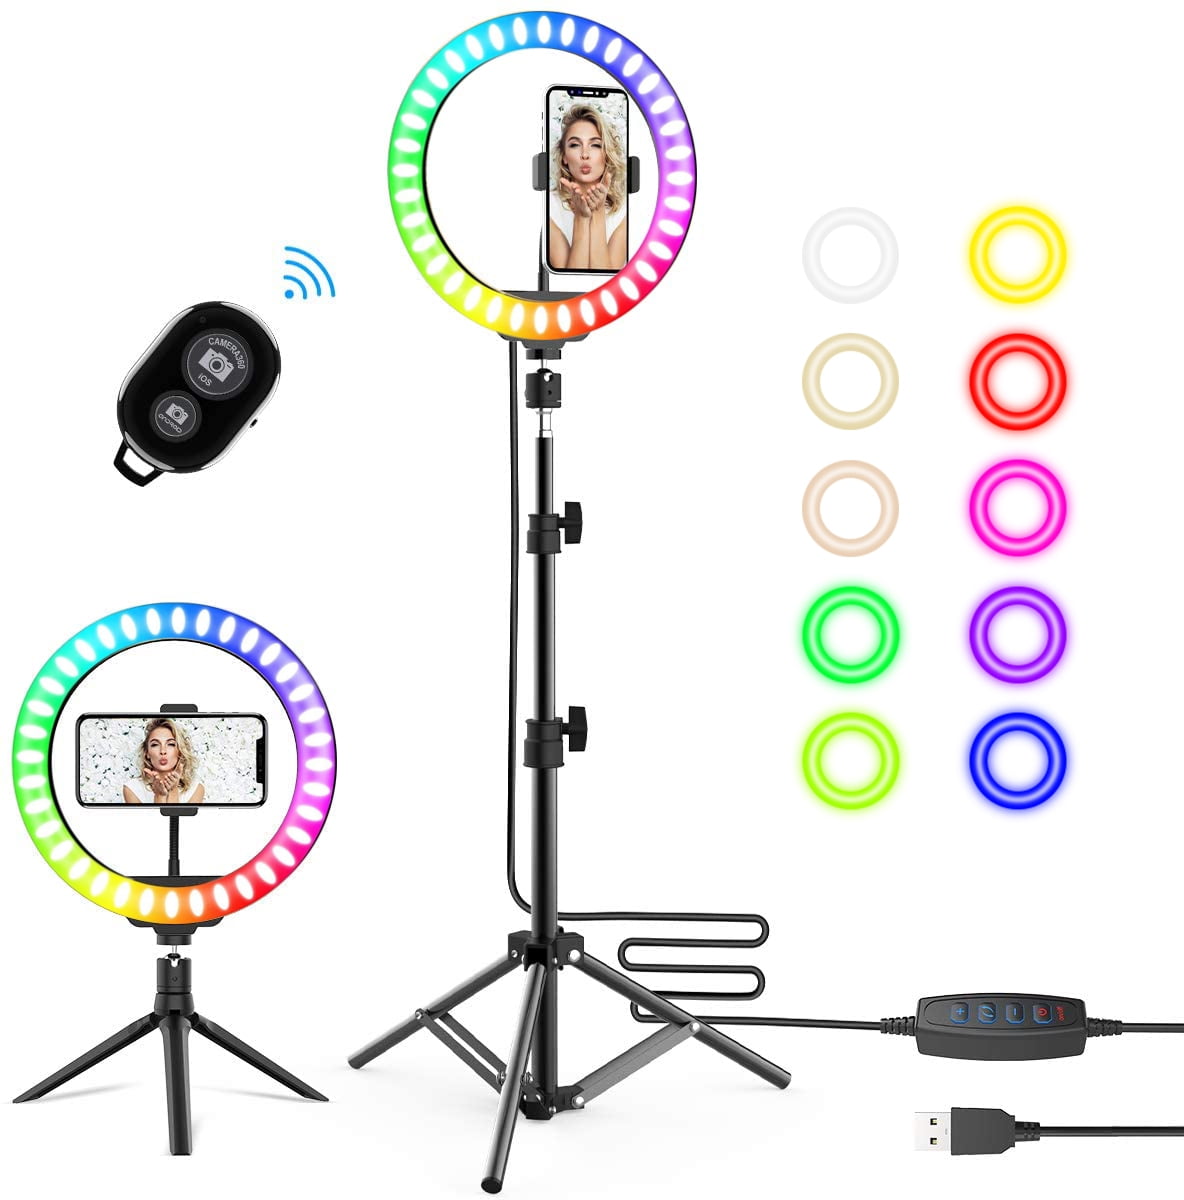 RGB Selfie Ring Light,14 RGB Colors Circle Light Dimmable LED Makeup Ring Light with Phone Holder & Extendable Tripod Stand for YouTube 10 Live Stream,Photography